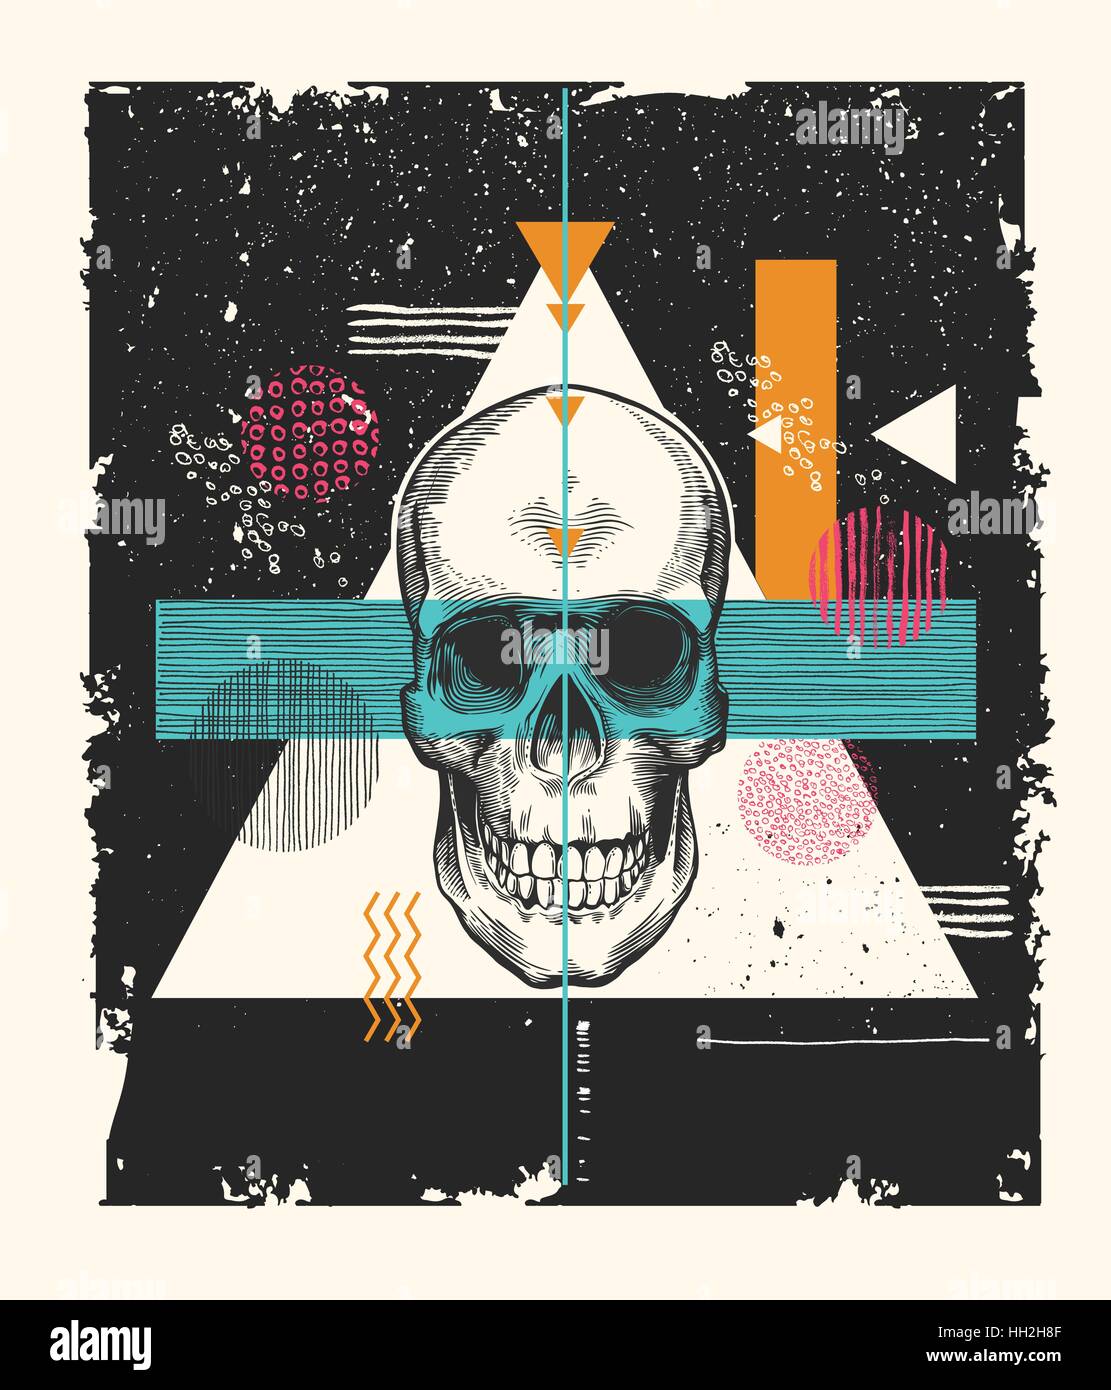 Human skull drawn in etching style surrounded by multicolored geometric shapes of different textures on black scratched and shabby background. Grunge vector illustration for banner, poster, print Stock Vector